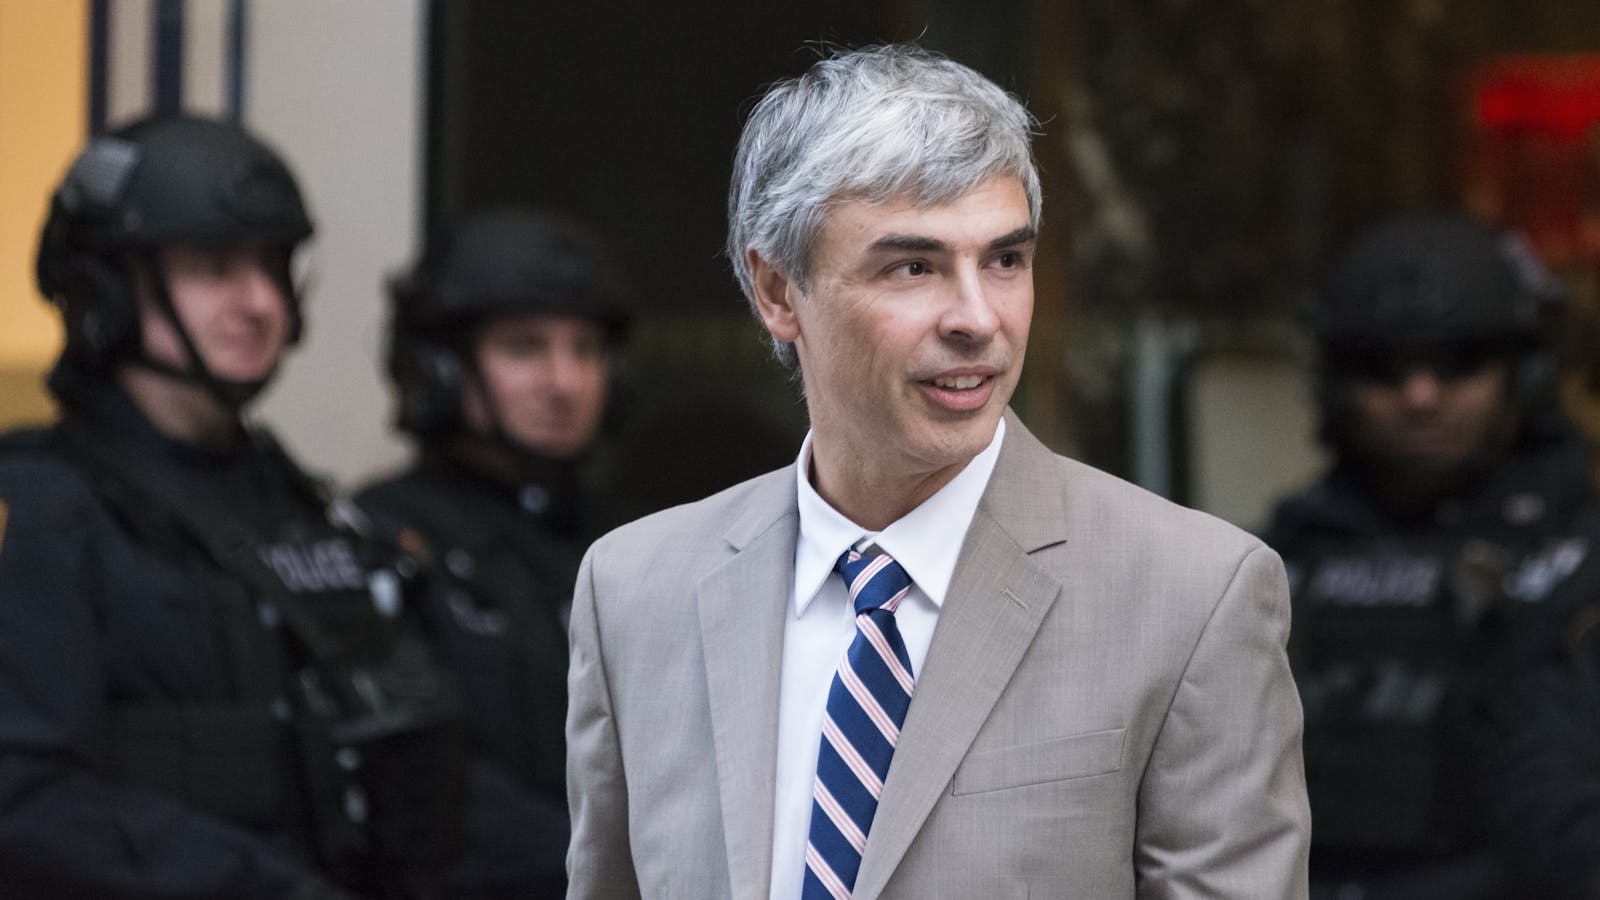 Alphabet CEO Larry Page. Photo by Bloomberg.